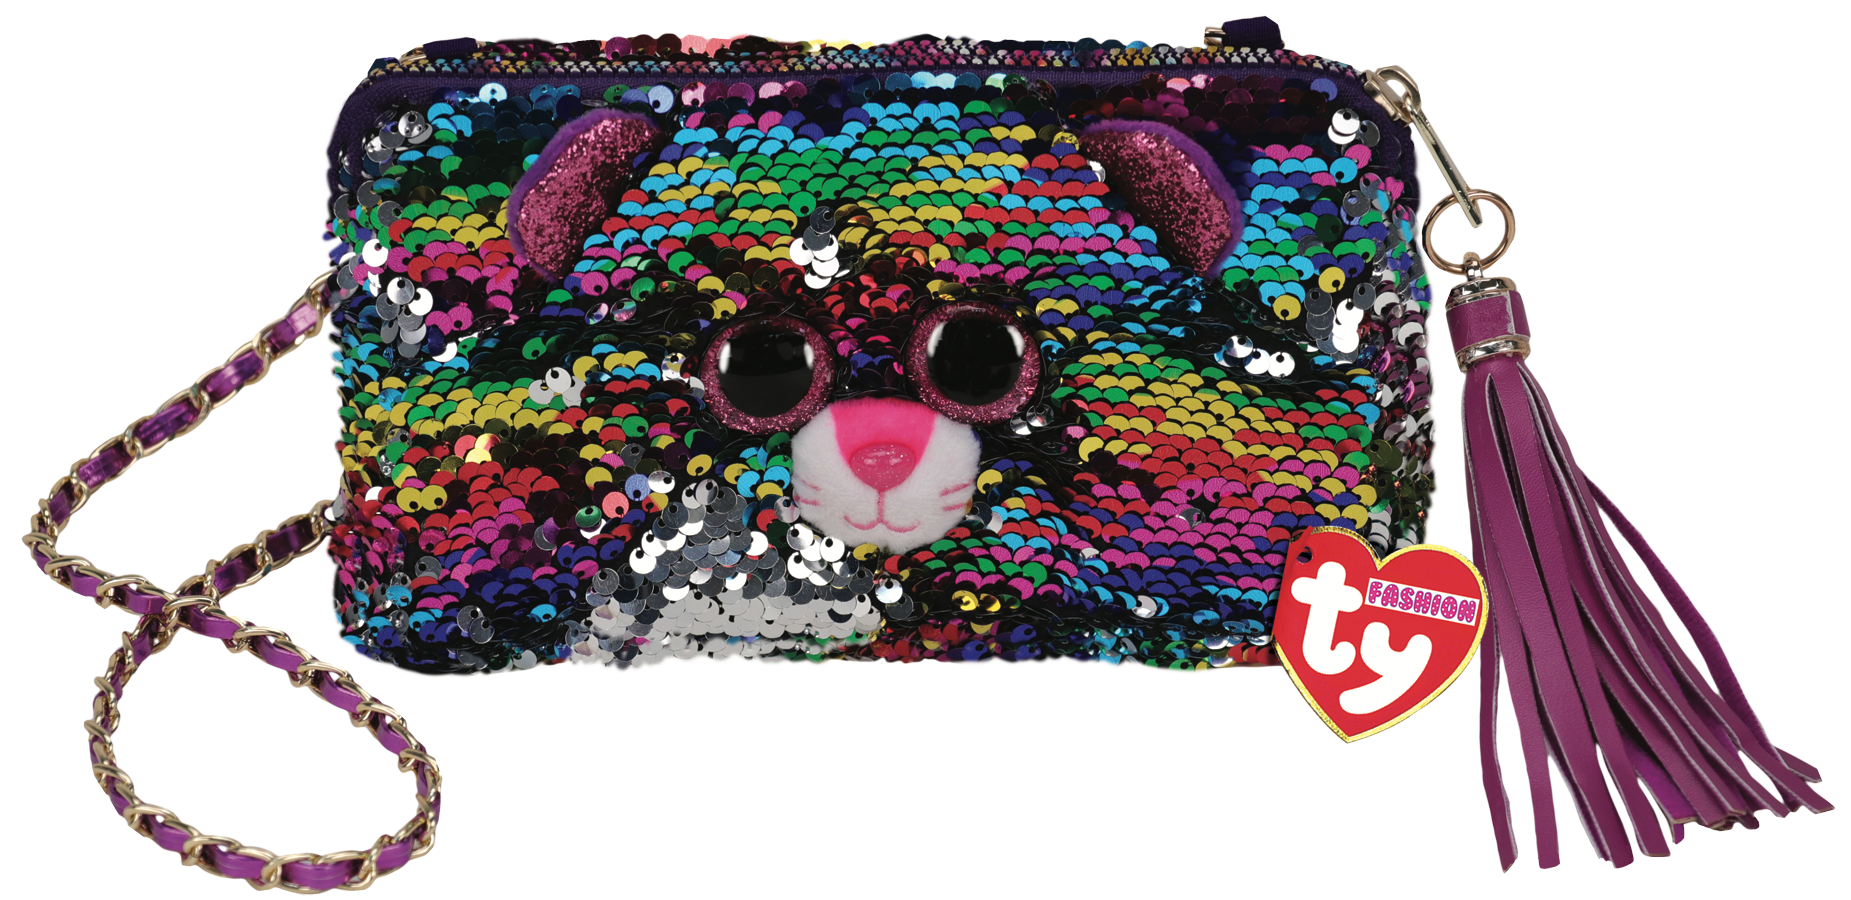 Ty Plush - Sequin Square Purse - Dotty the Leopard (TY95145)